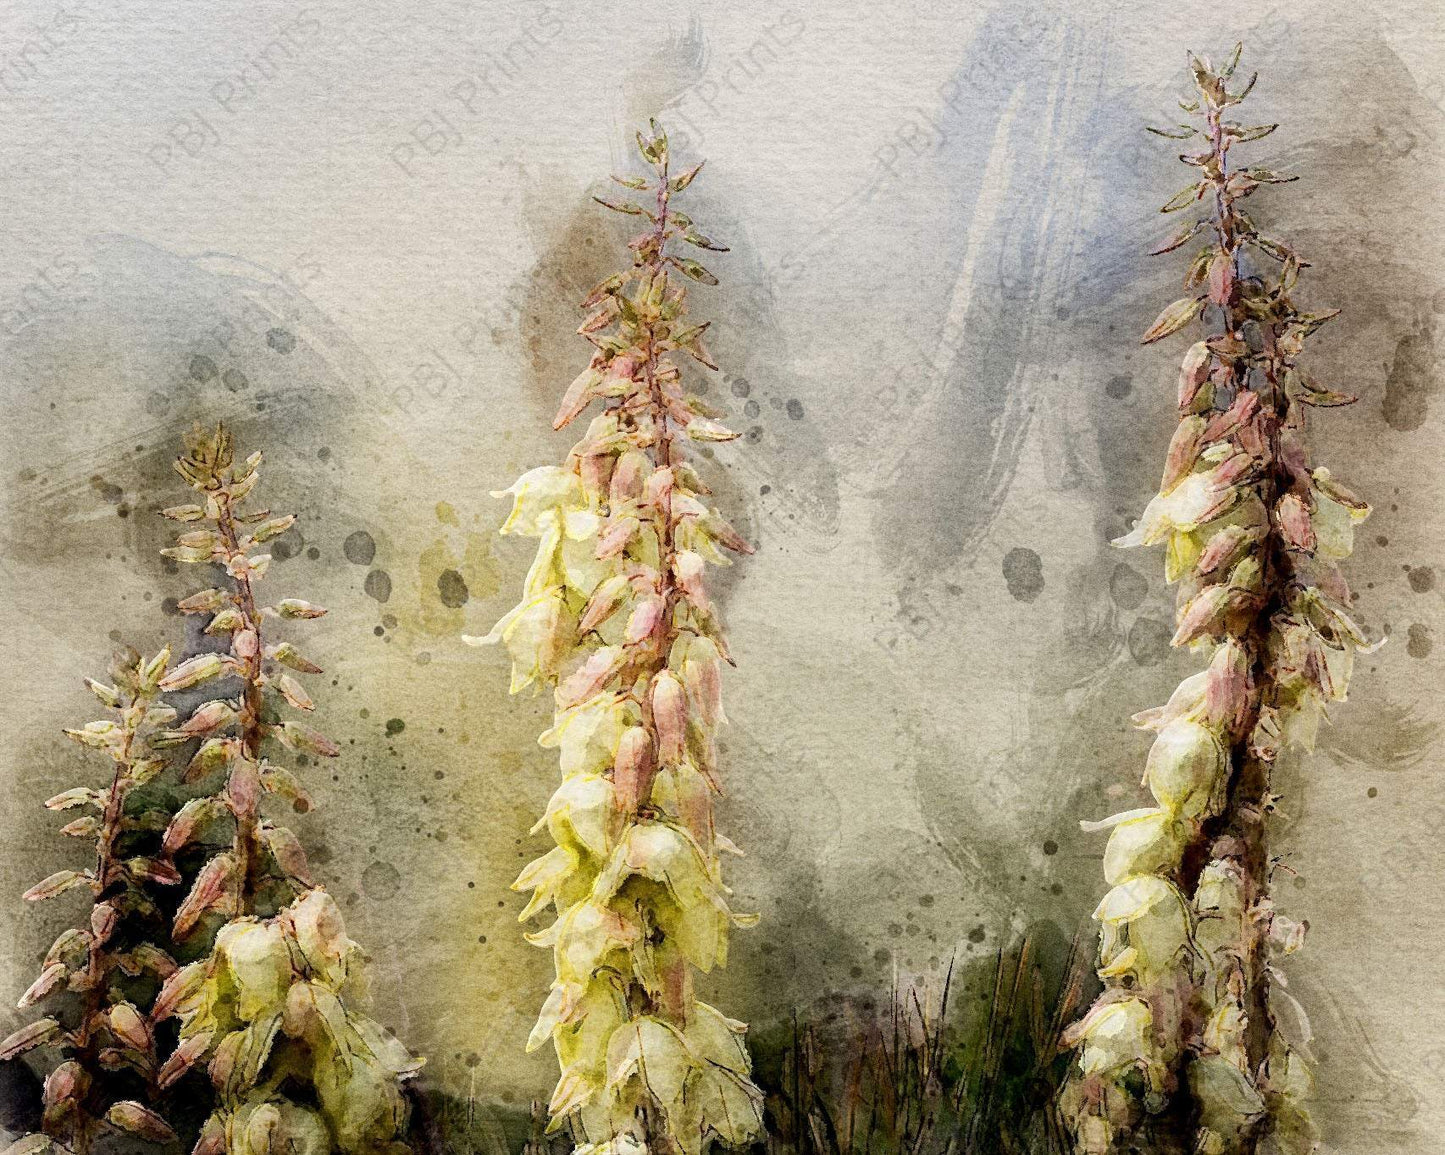 Yucca Watercolor - Artist by Justin Rice - New Arrivals